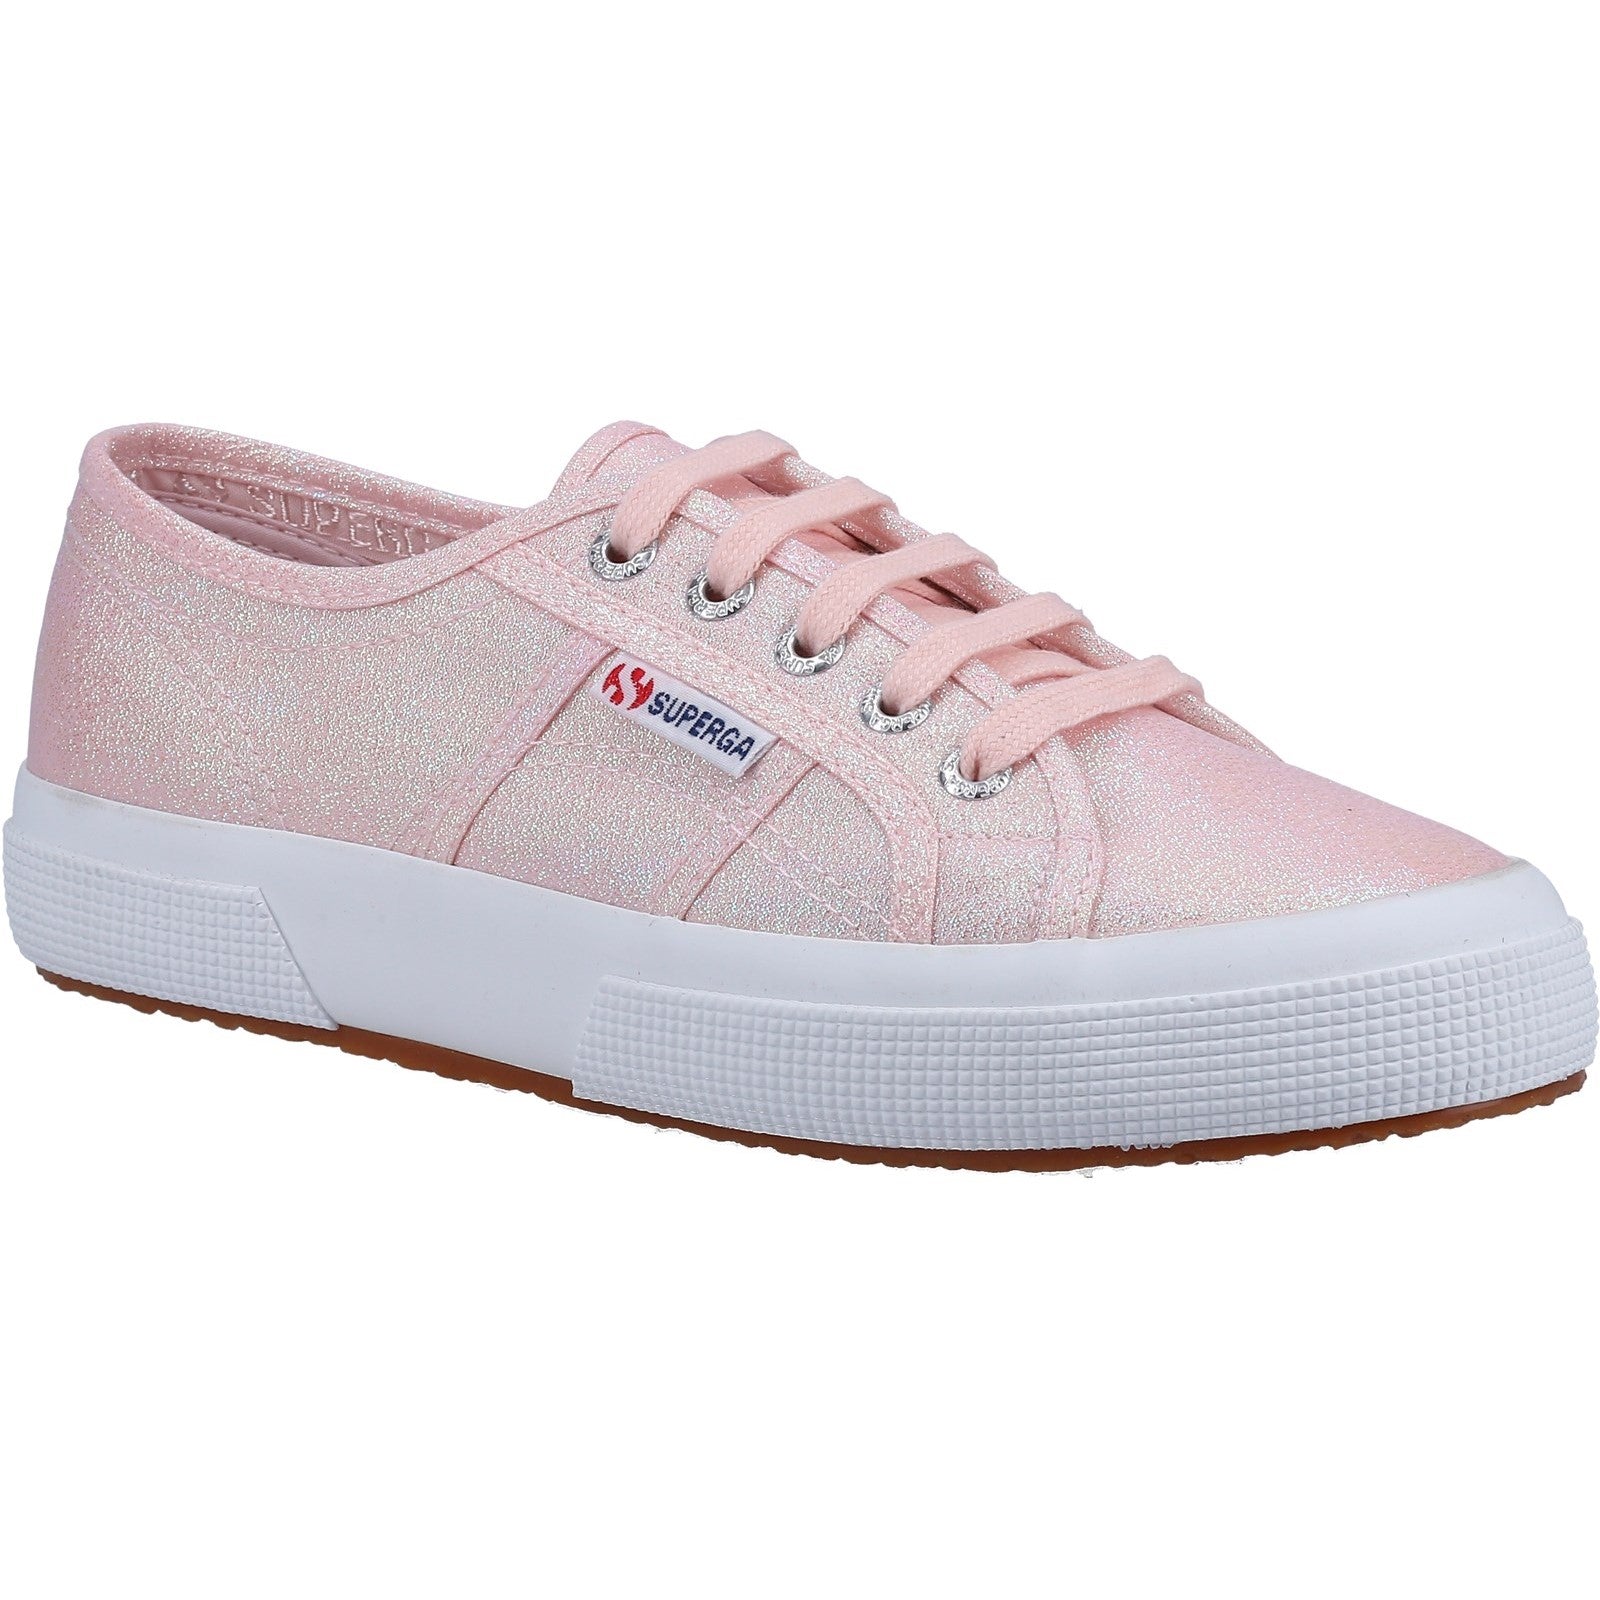 Superga Womens 2750 Lamé Trainers - Pink